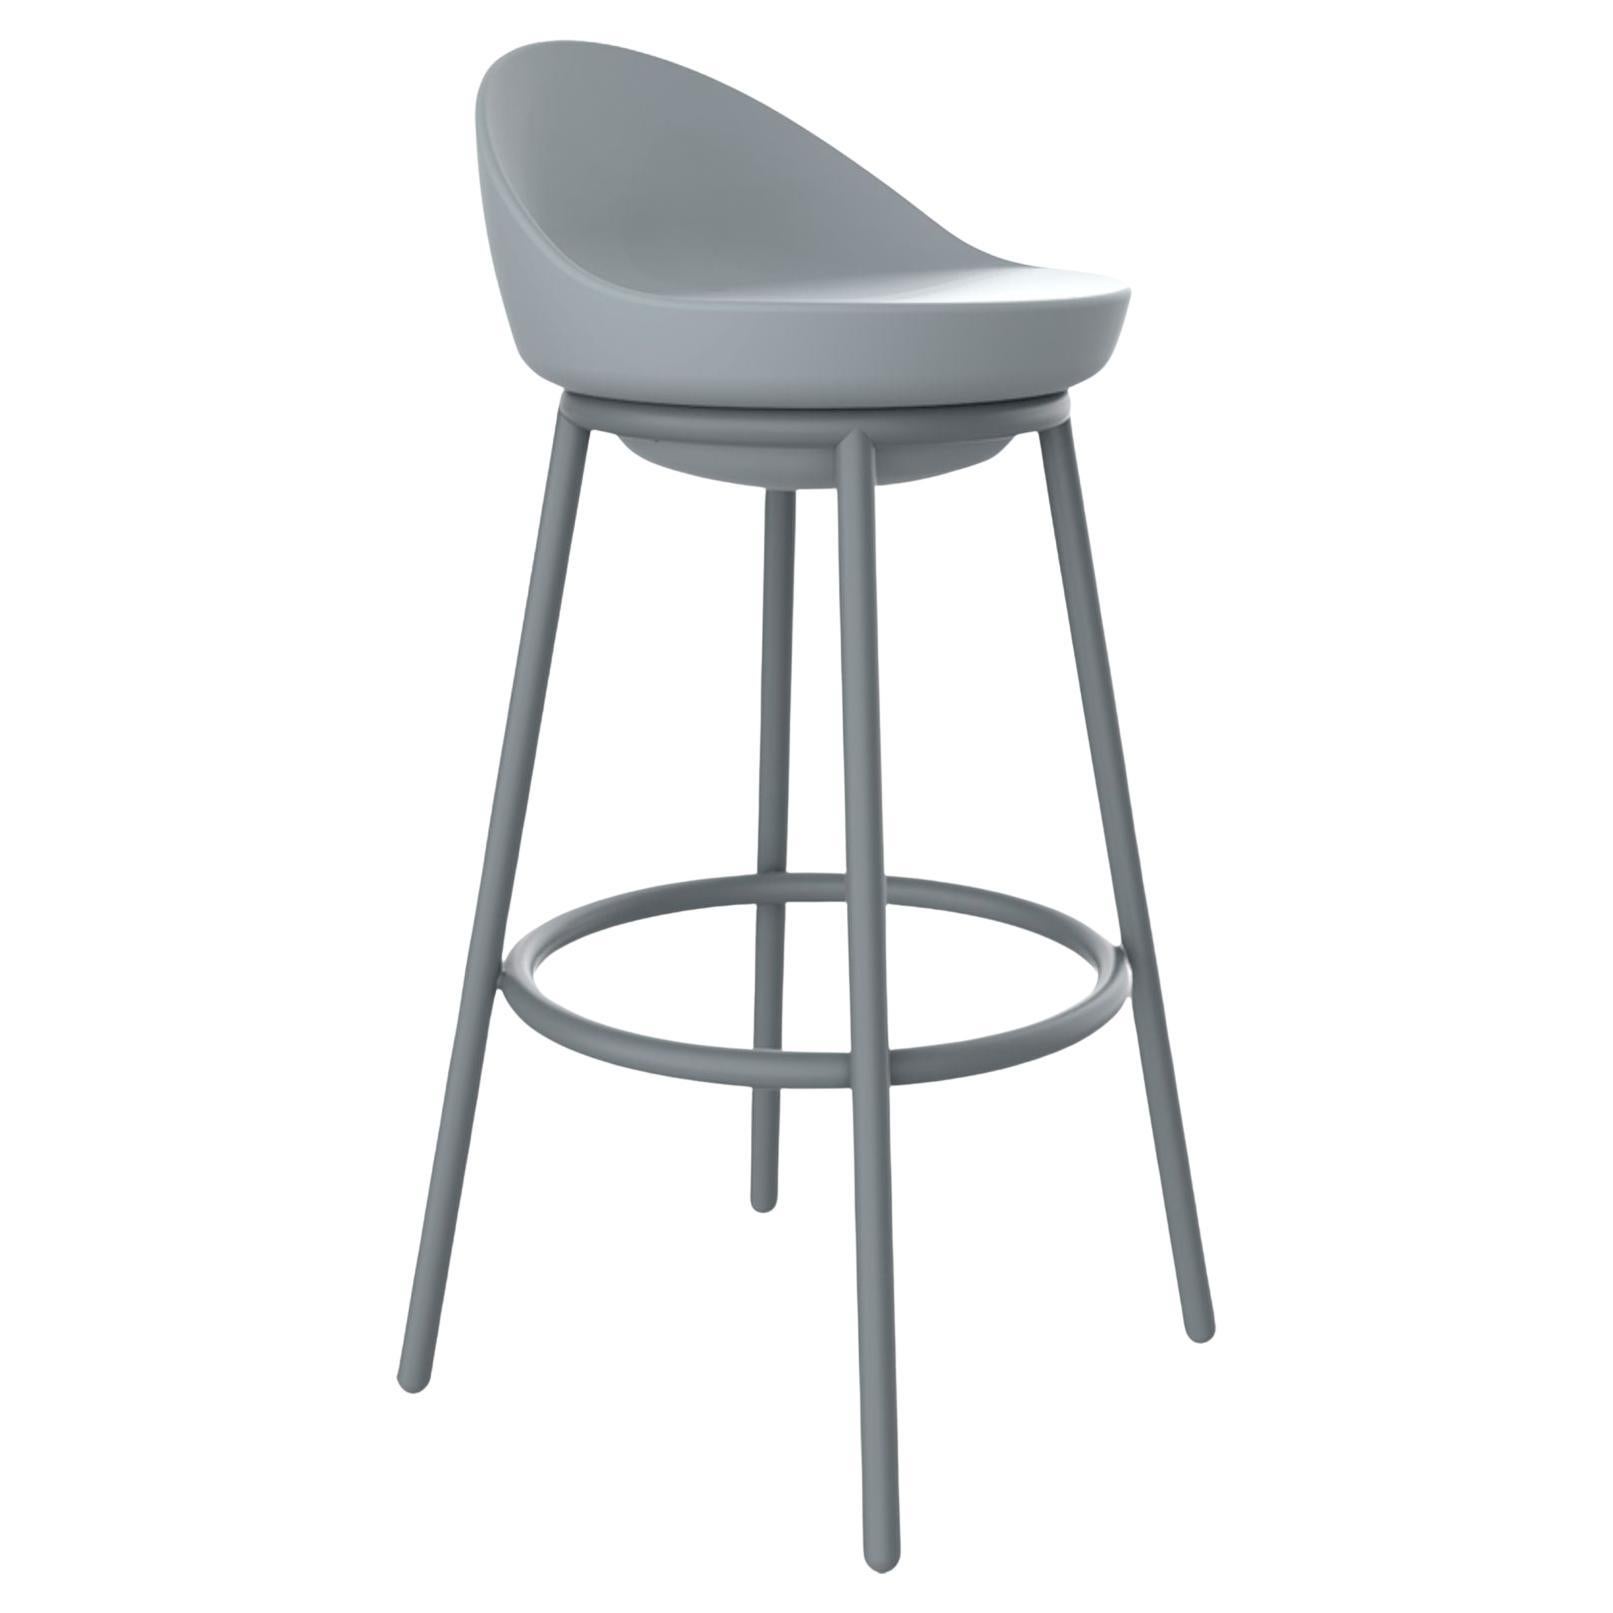 Lace Grey Stool by Mowee